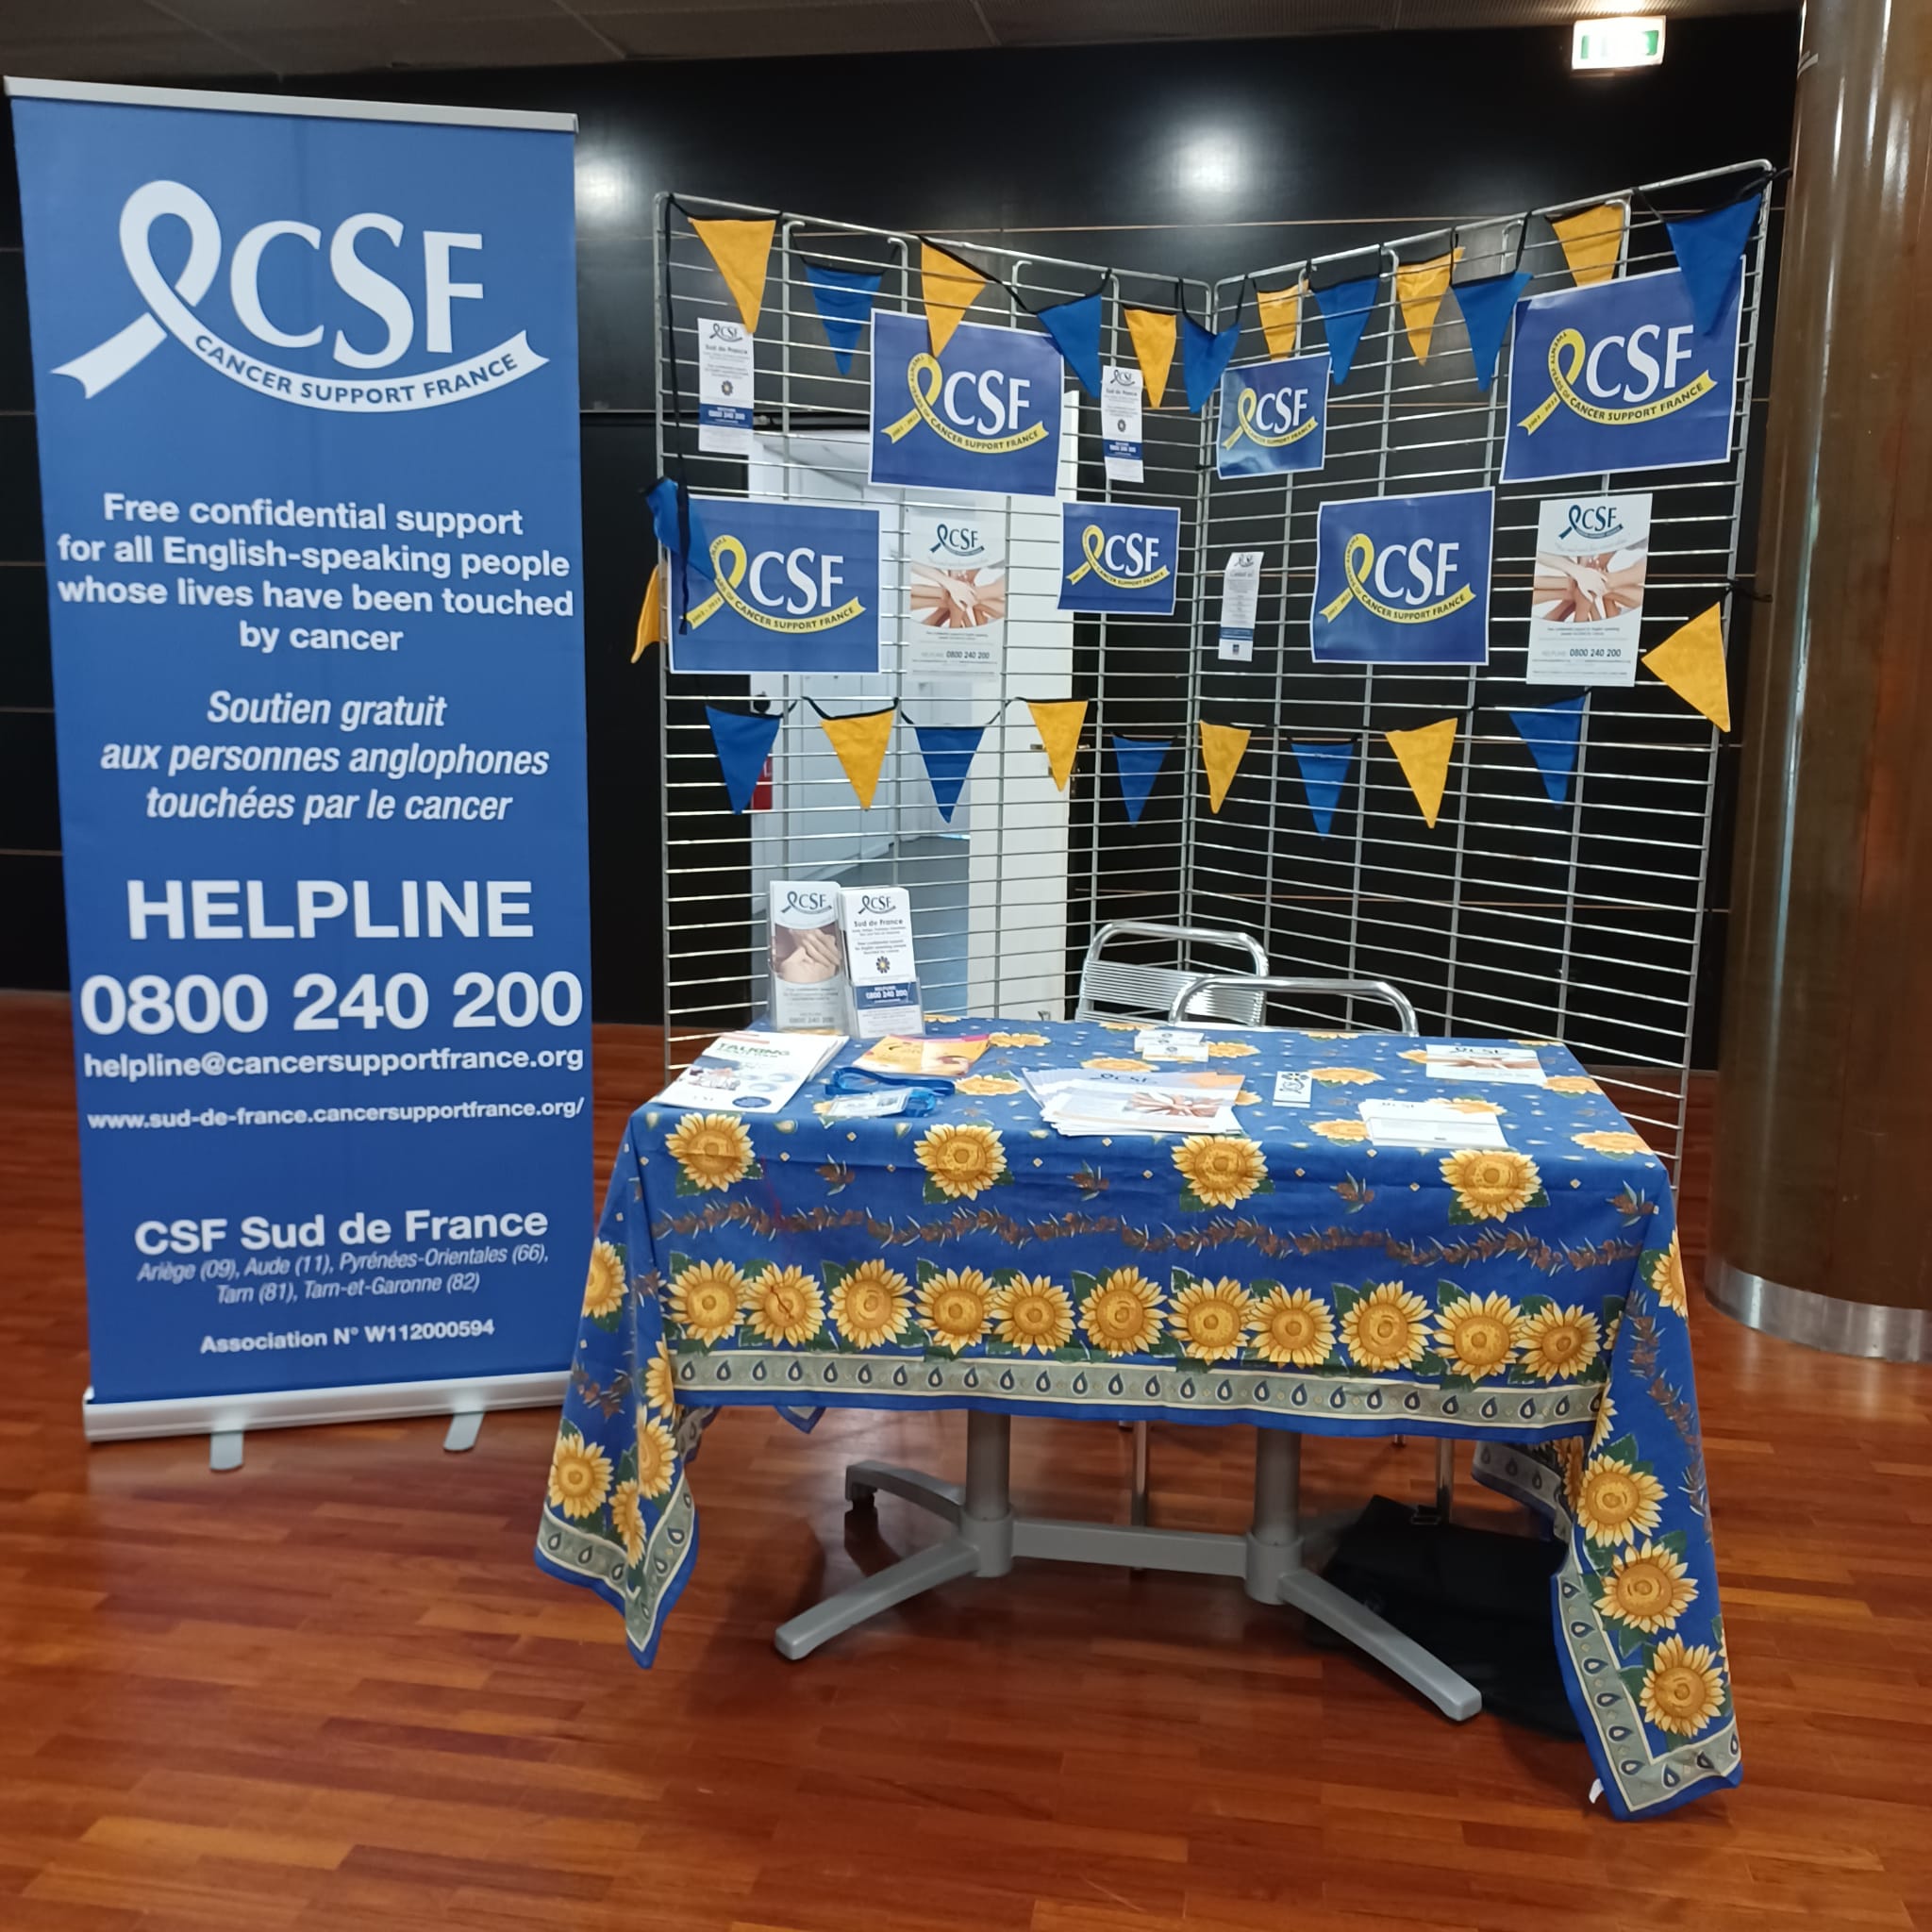 csf support stand